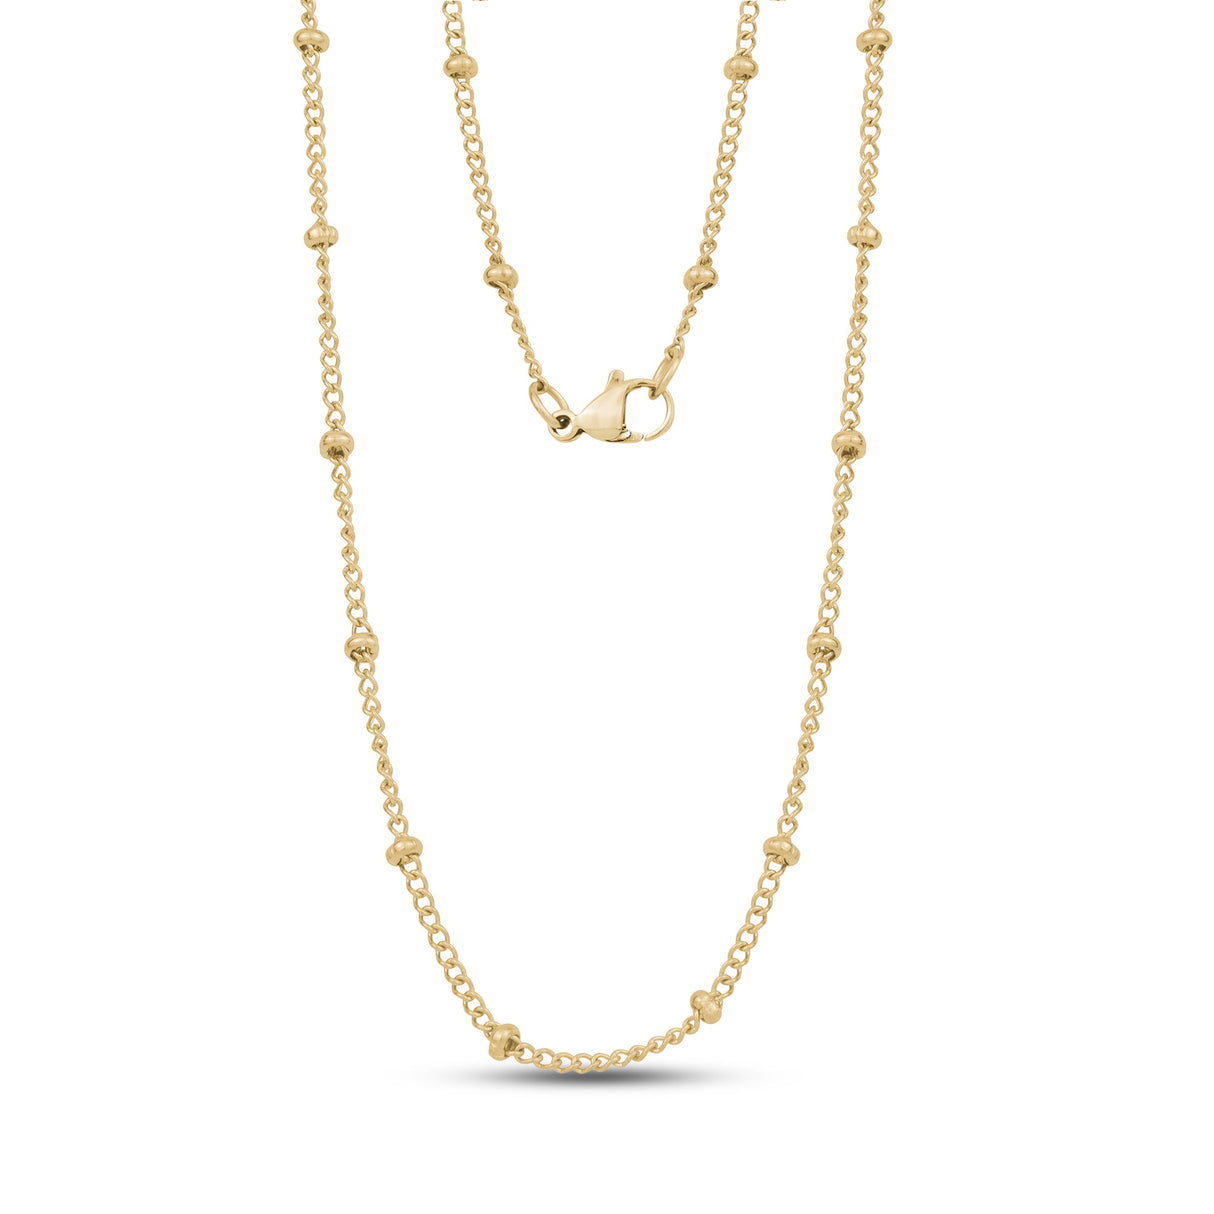 Women's Necklaces - Gold Beaded Cuban Link Chain